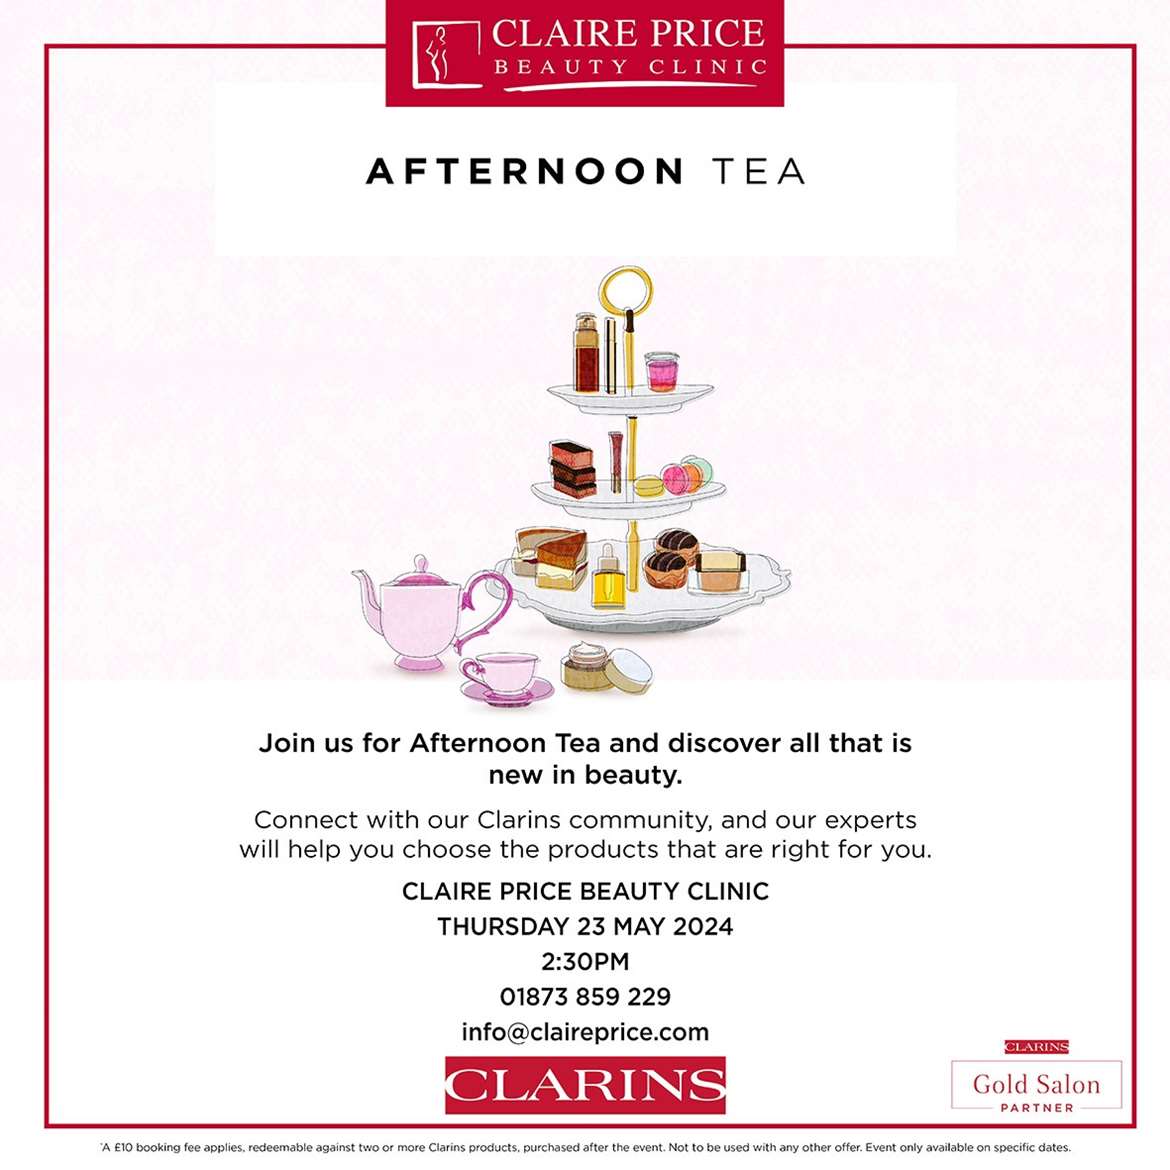 Join us for Afternoon Tea and discover all that is new in beauty.